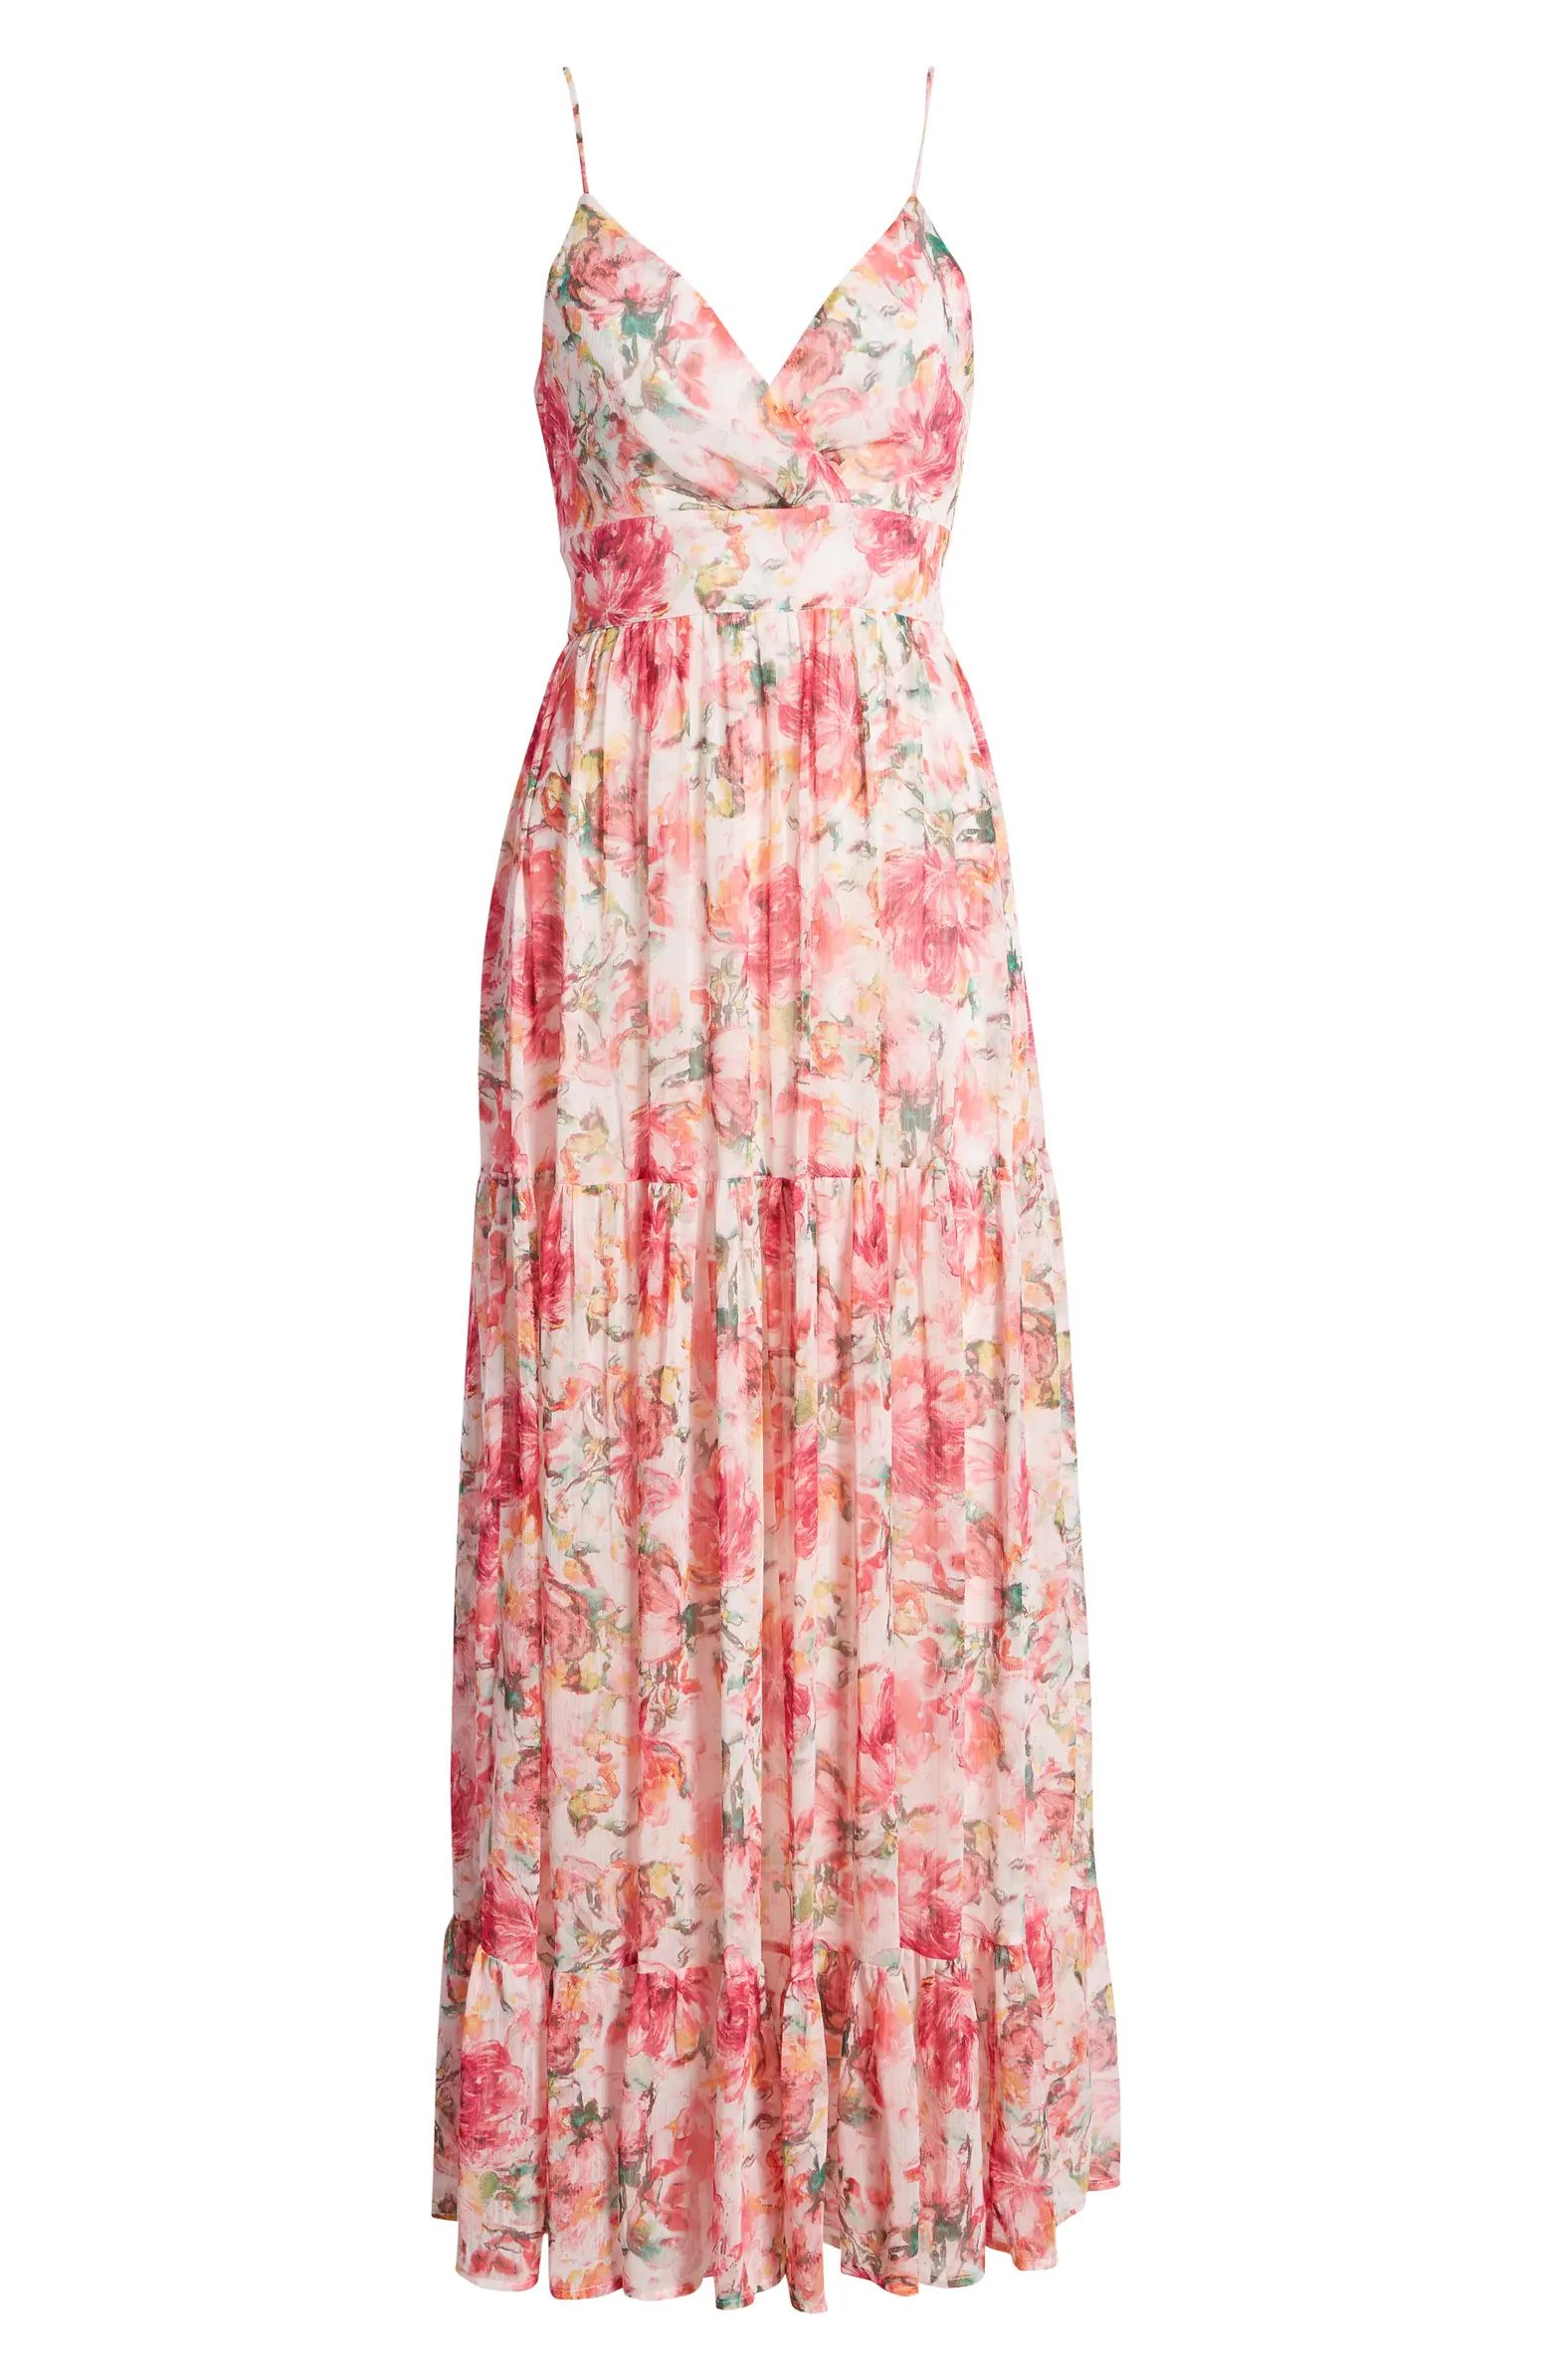 VICI Collection Floral Print Chiffon Maxi Dress | Nordstrom | Nordstrom